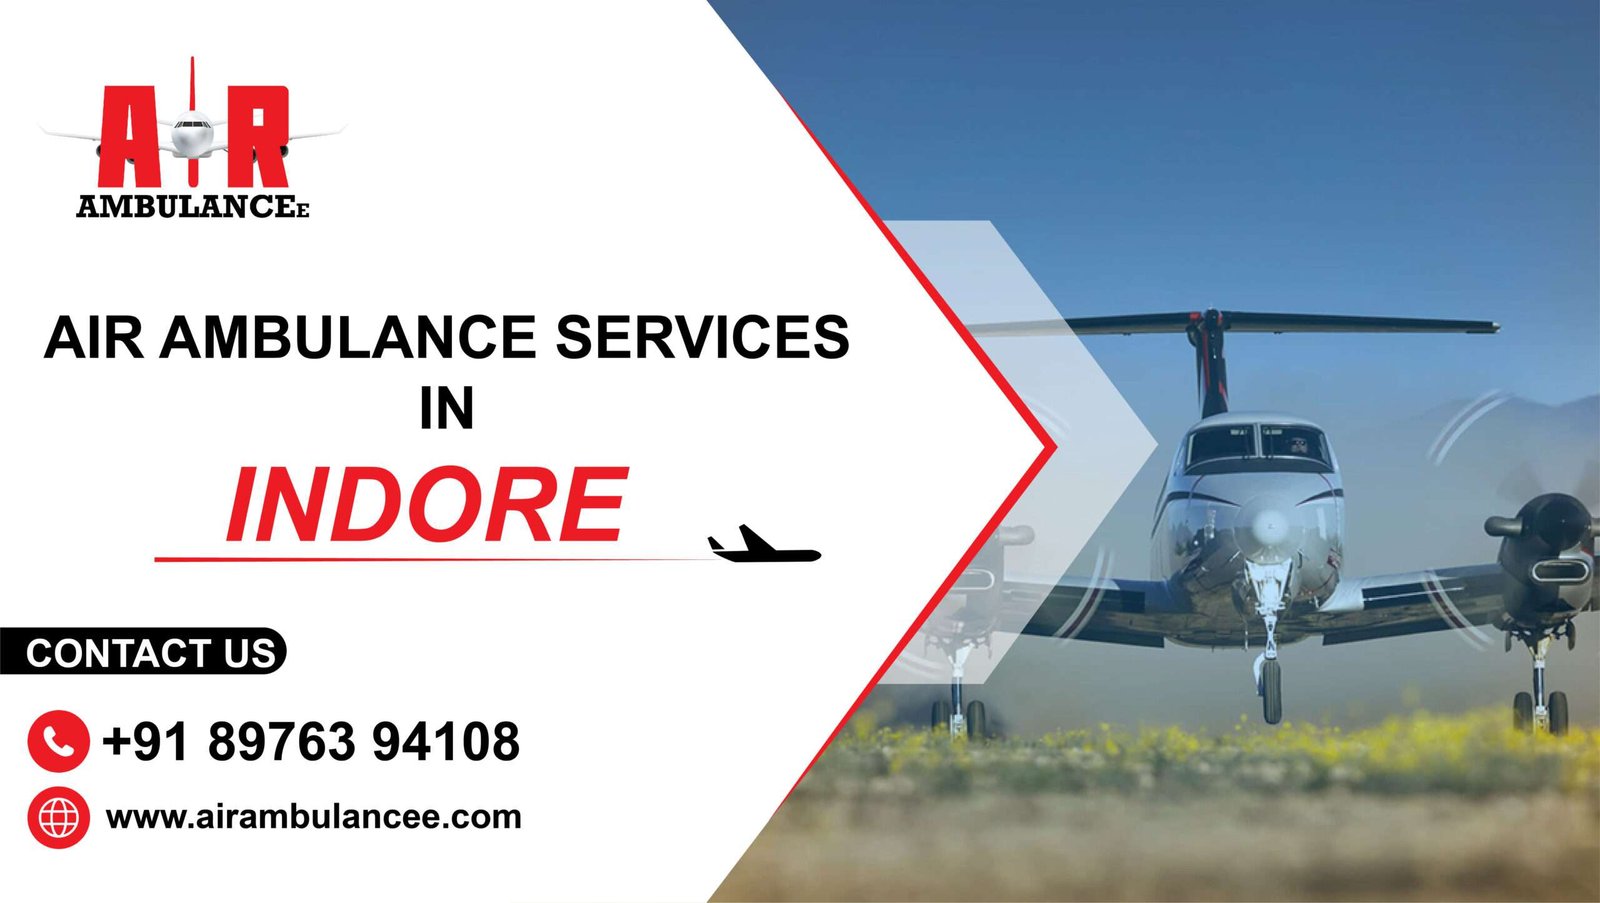 Air Ambulance Services In Indore